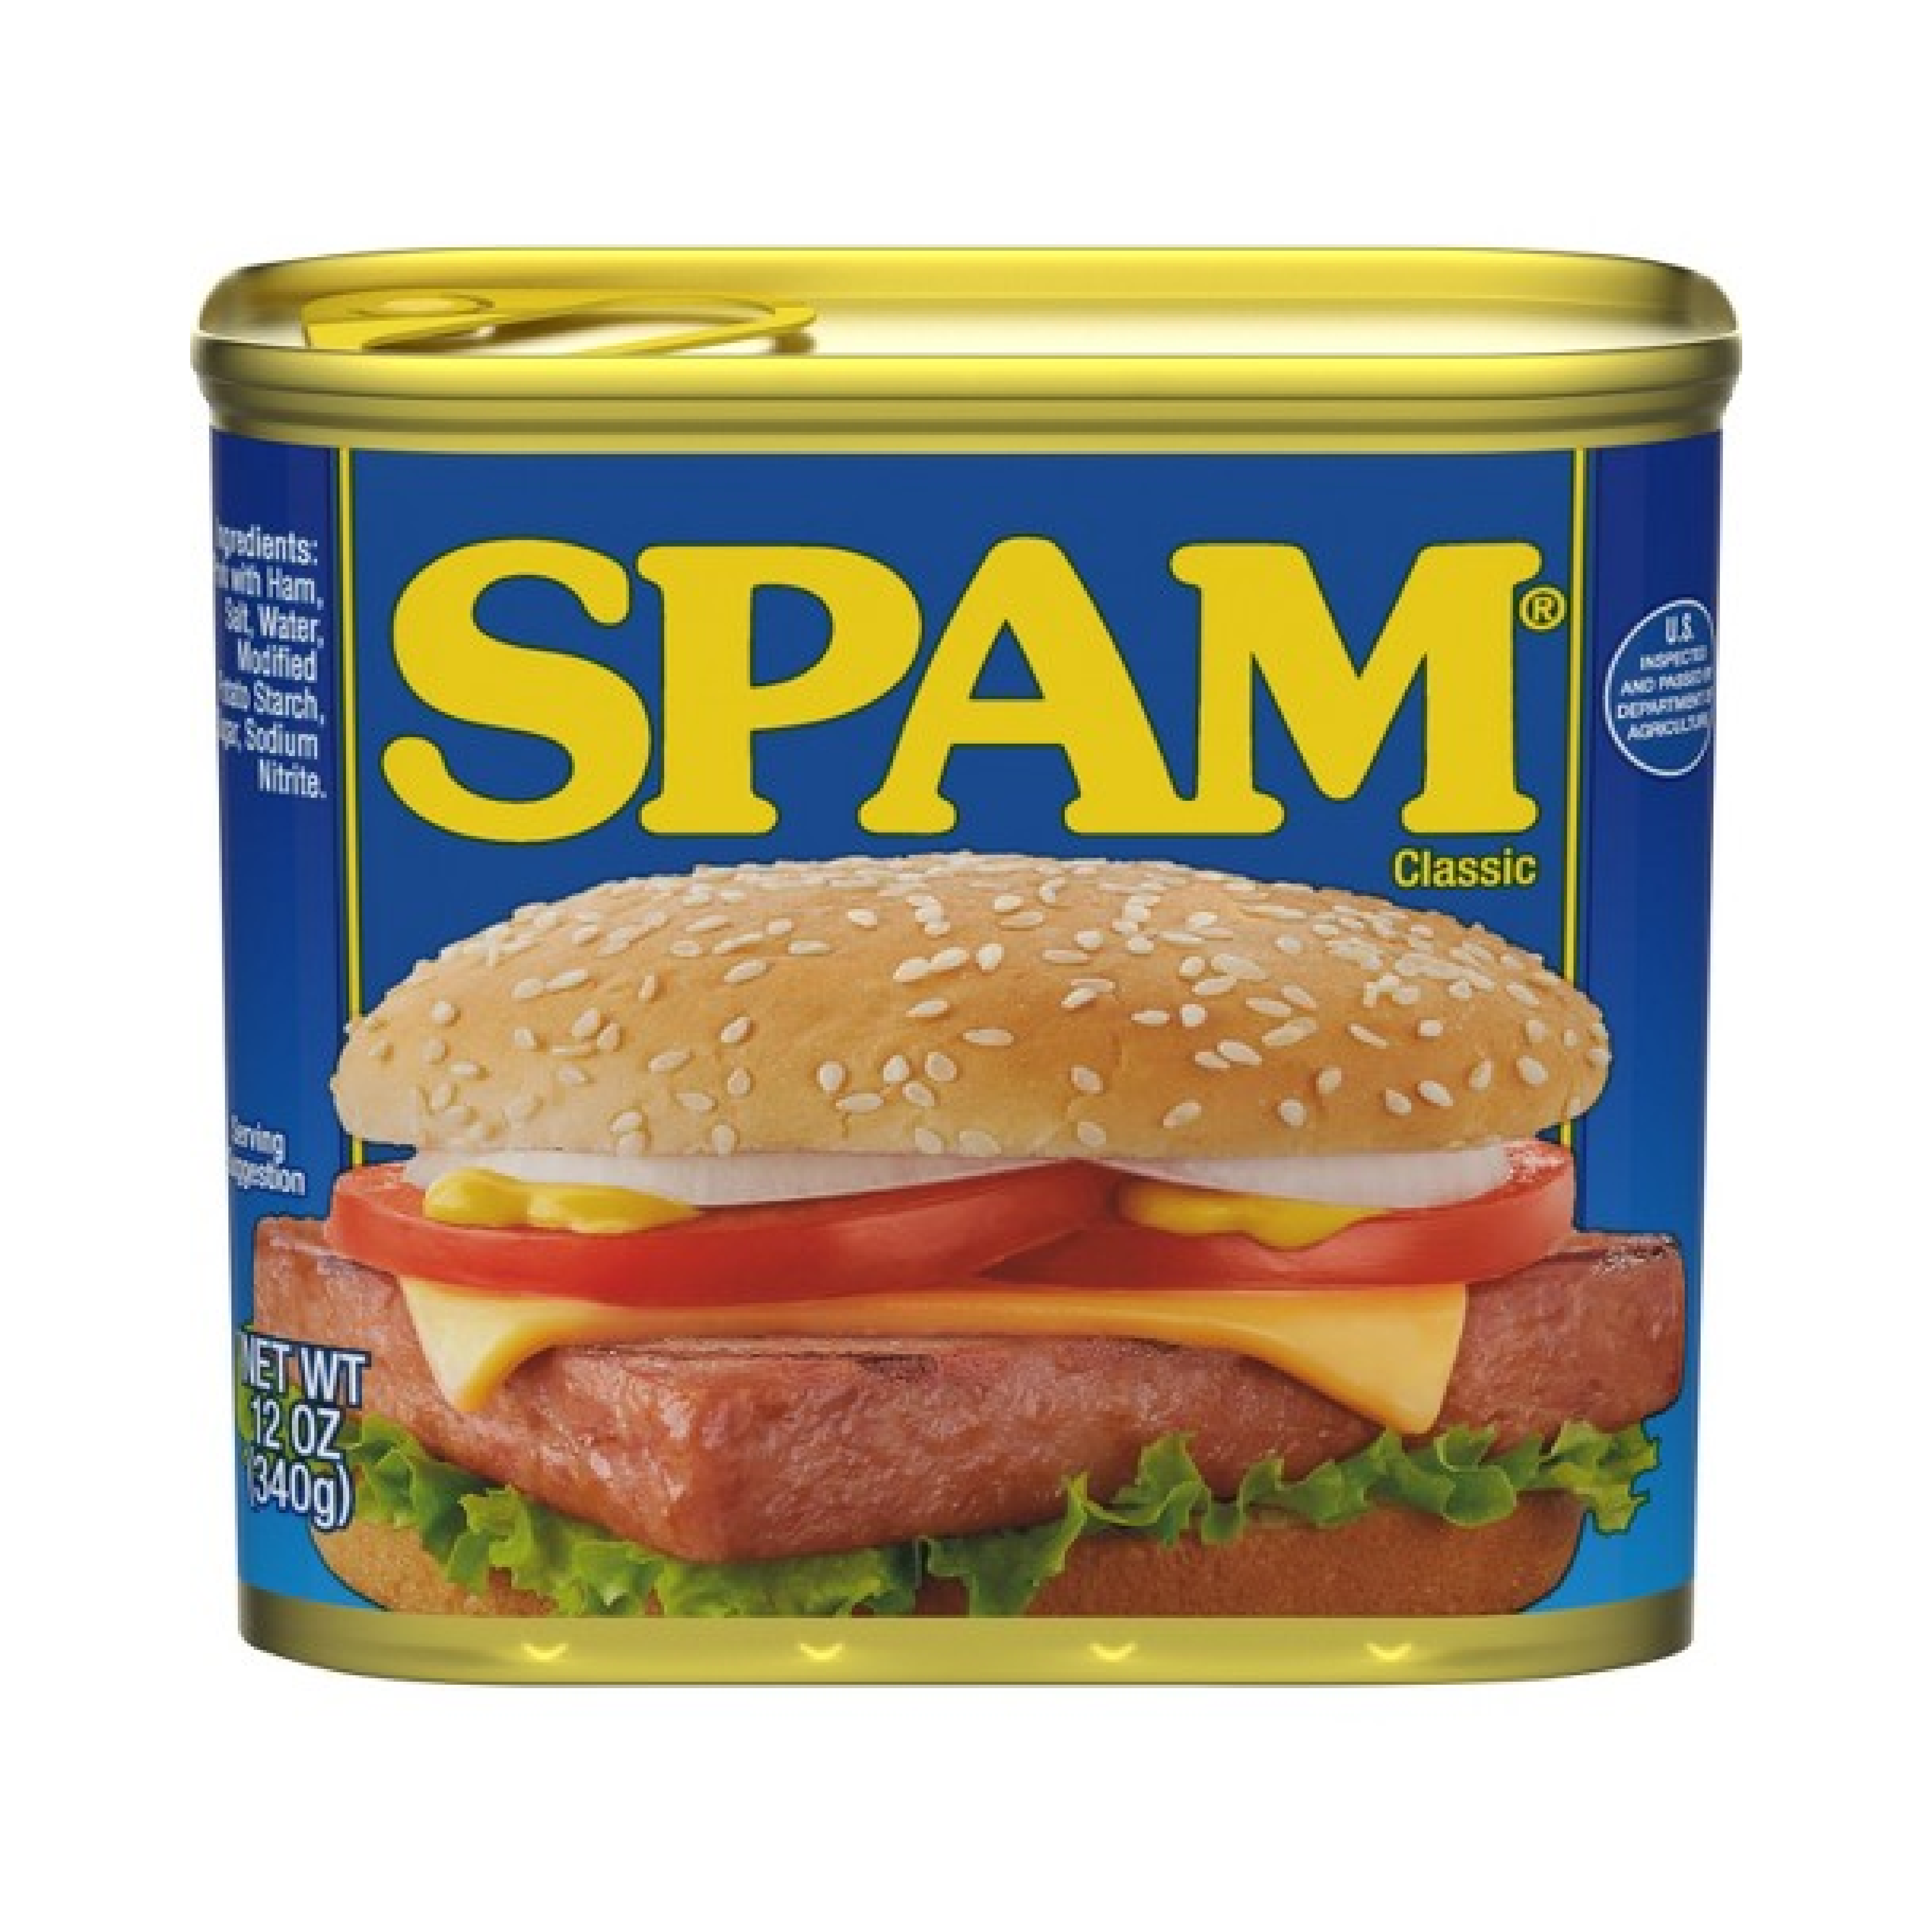 Spam Classic Lunch Meat 12oz